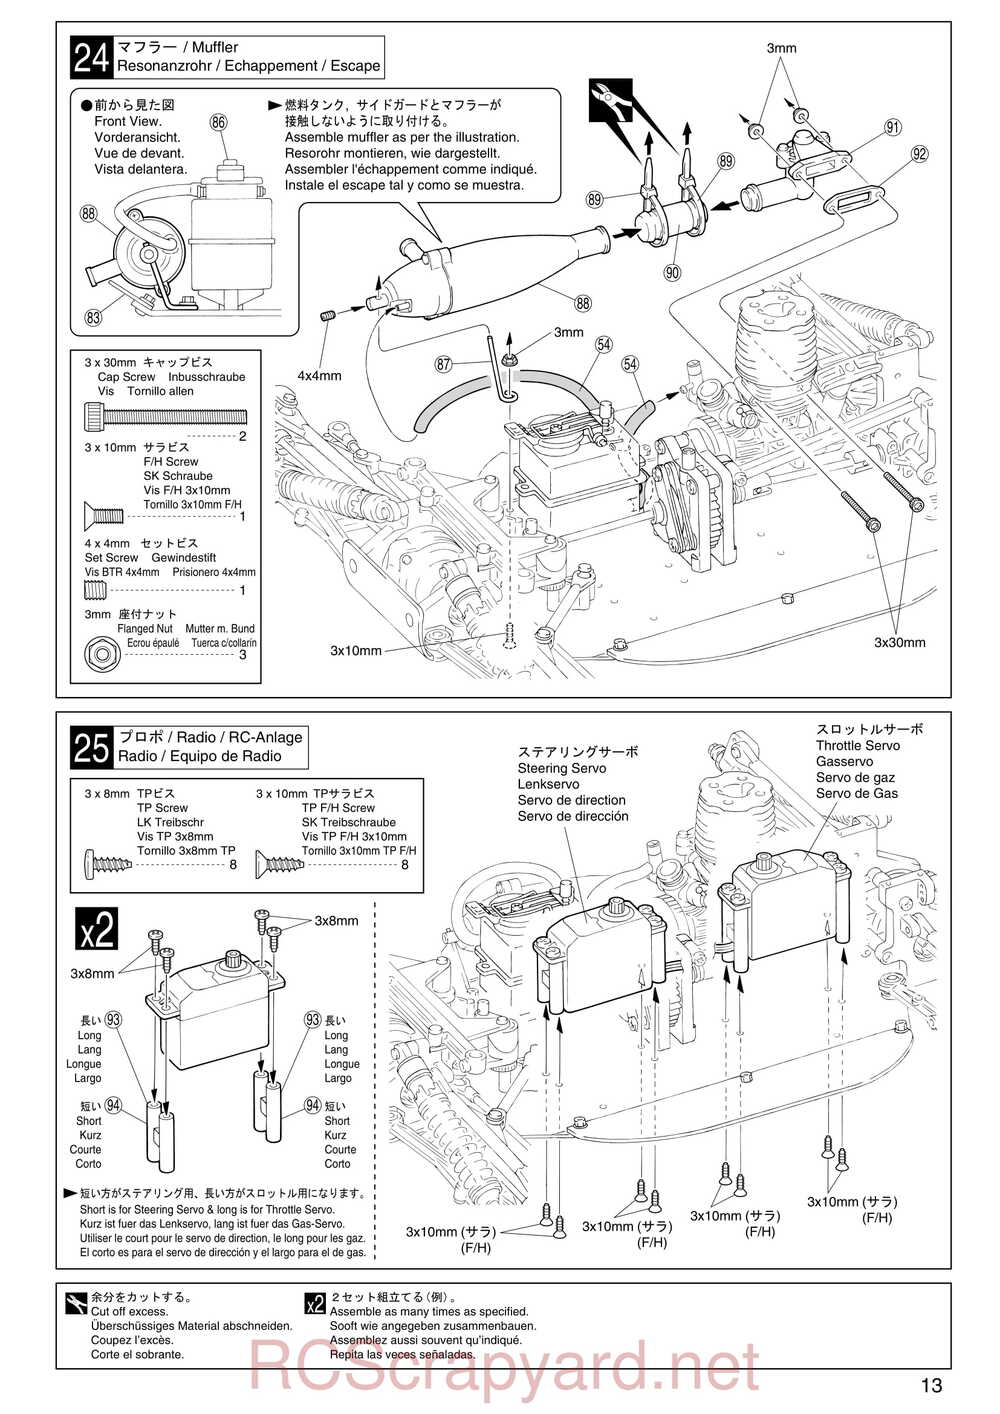 Kyosho - 31095 - TR-15 Stadium-Force - Manual - Page 13